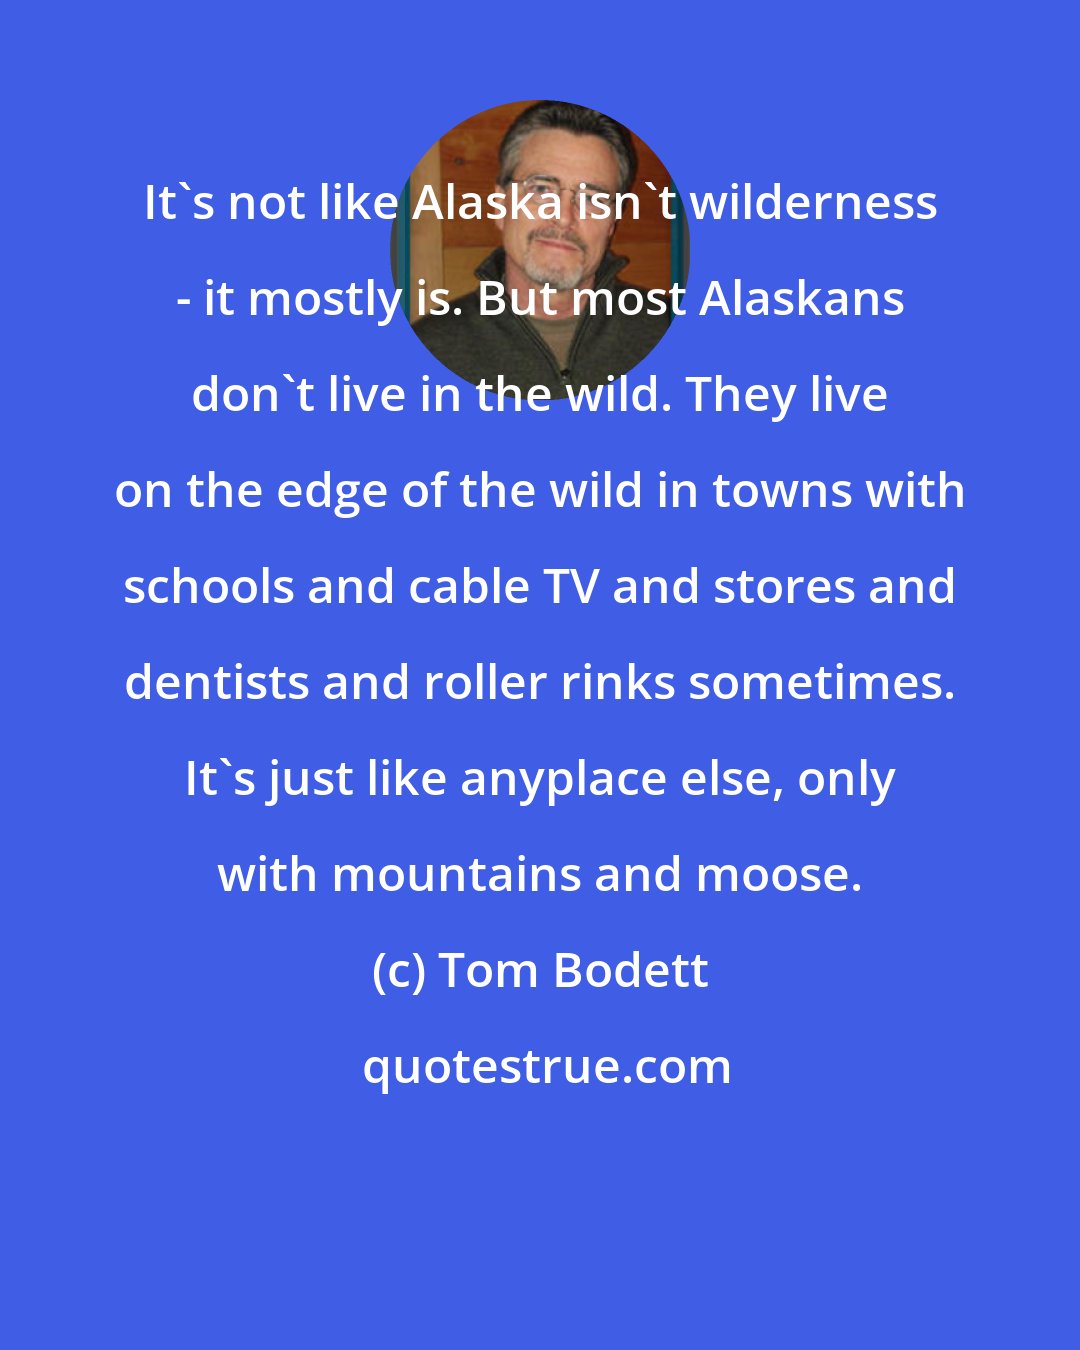 Tom Bodett: It's not like Alaska isn't wilderness - it mostly is. But most Alaskans don't live in the wild. They live on the edge of the wild in towns with schools and cable TV and stores and dentists and roller rinks sometimes. It's just like anyplace else, only with mountains and moose.